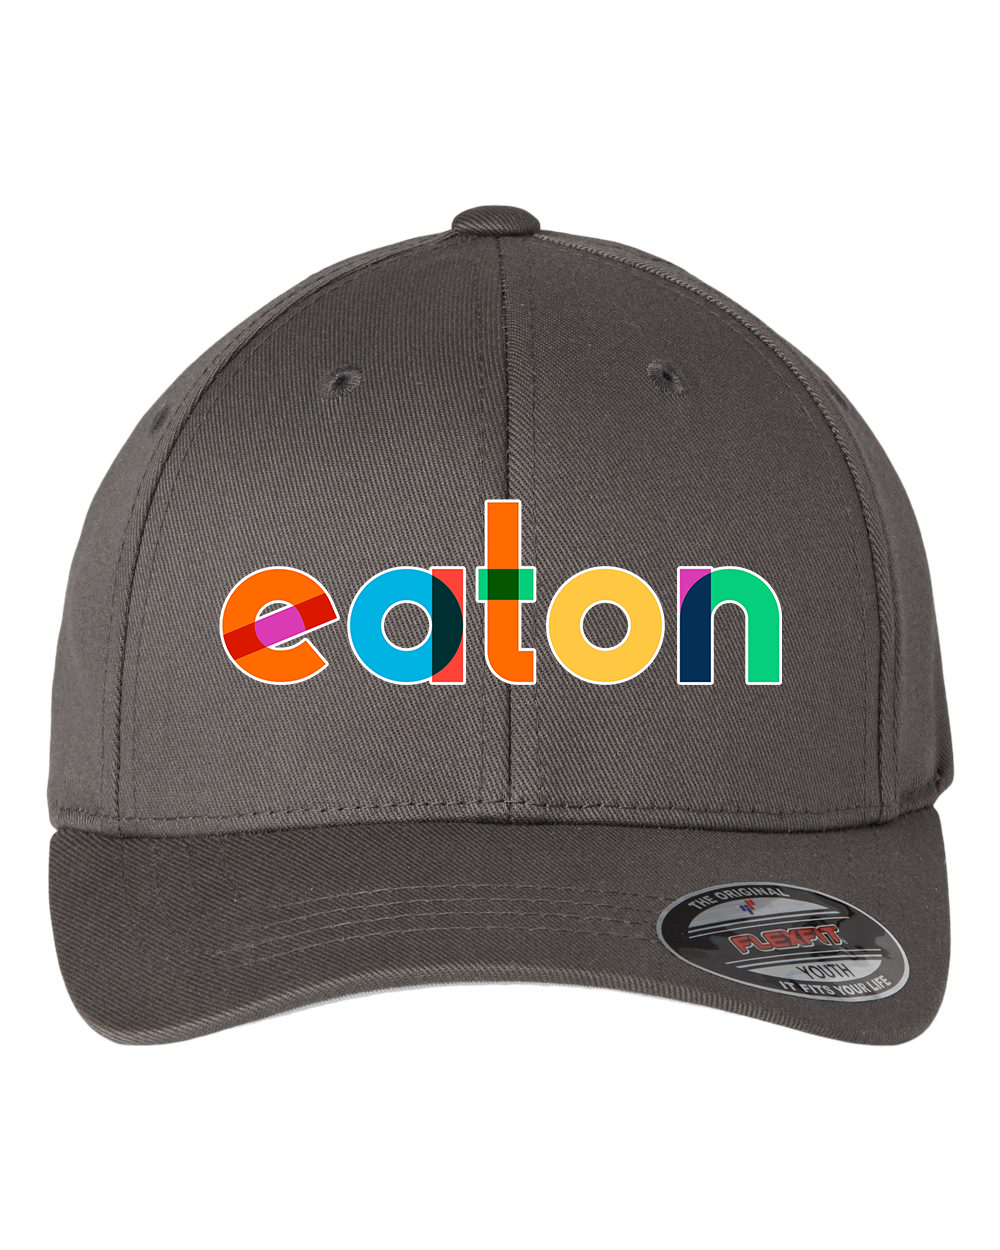 Youth Colorful Eaton Hat